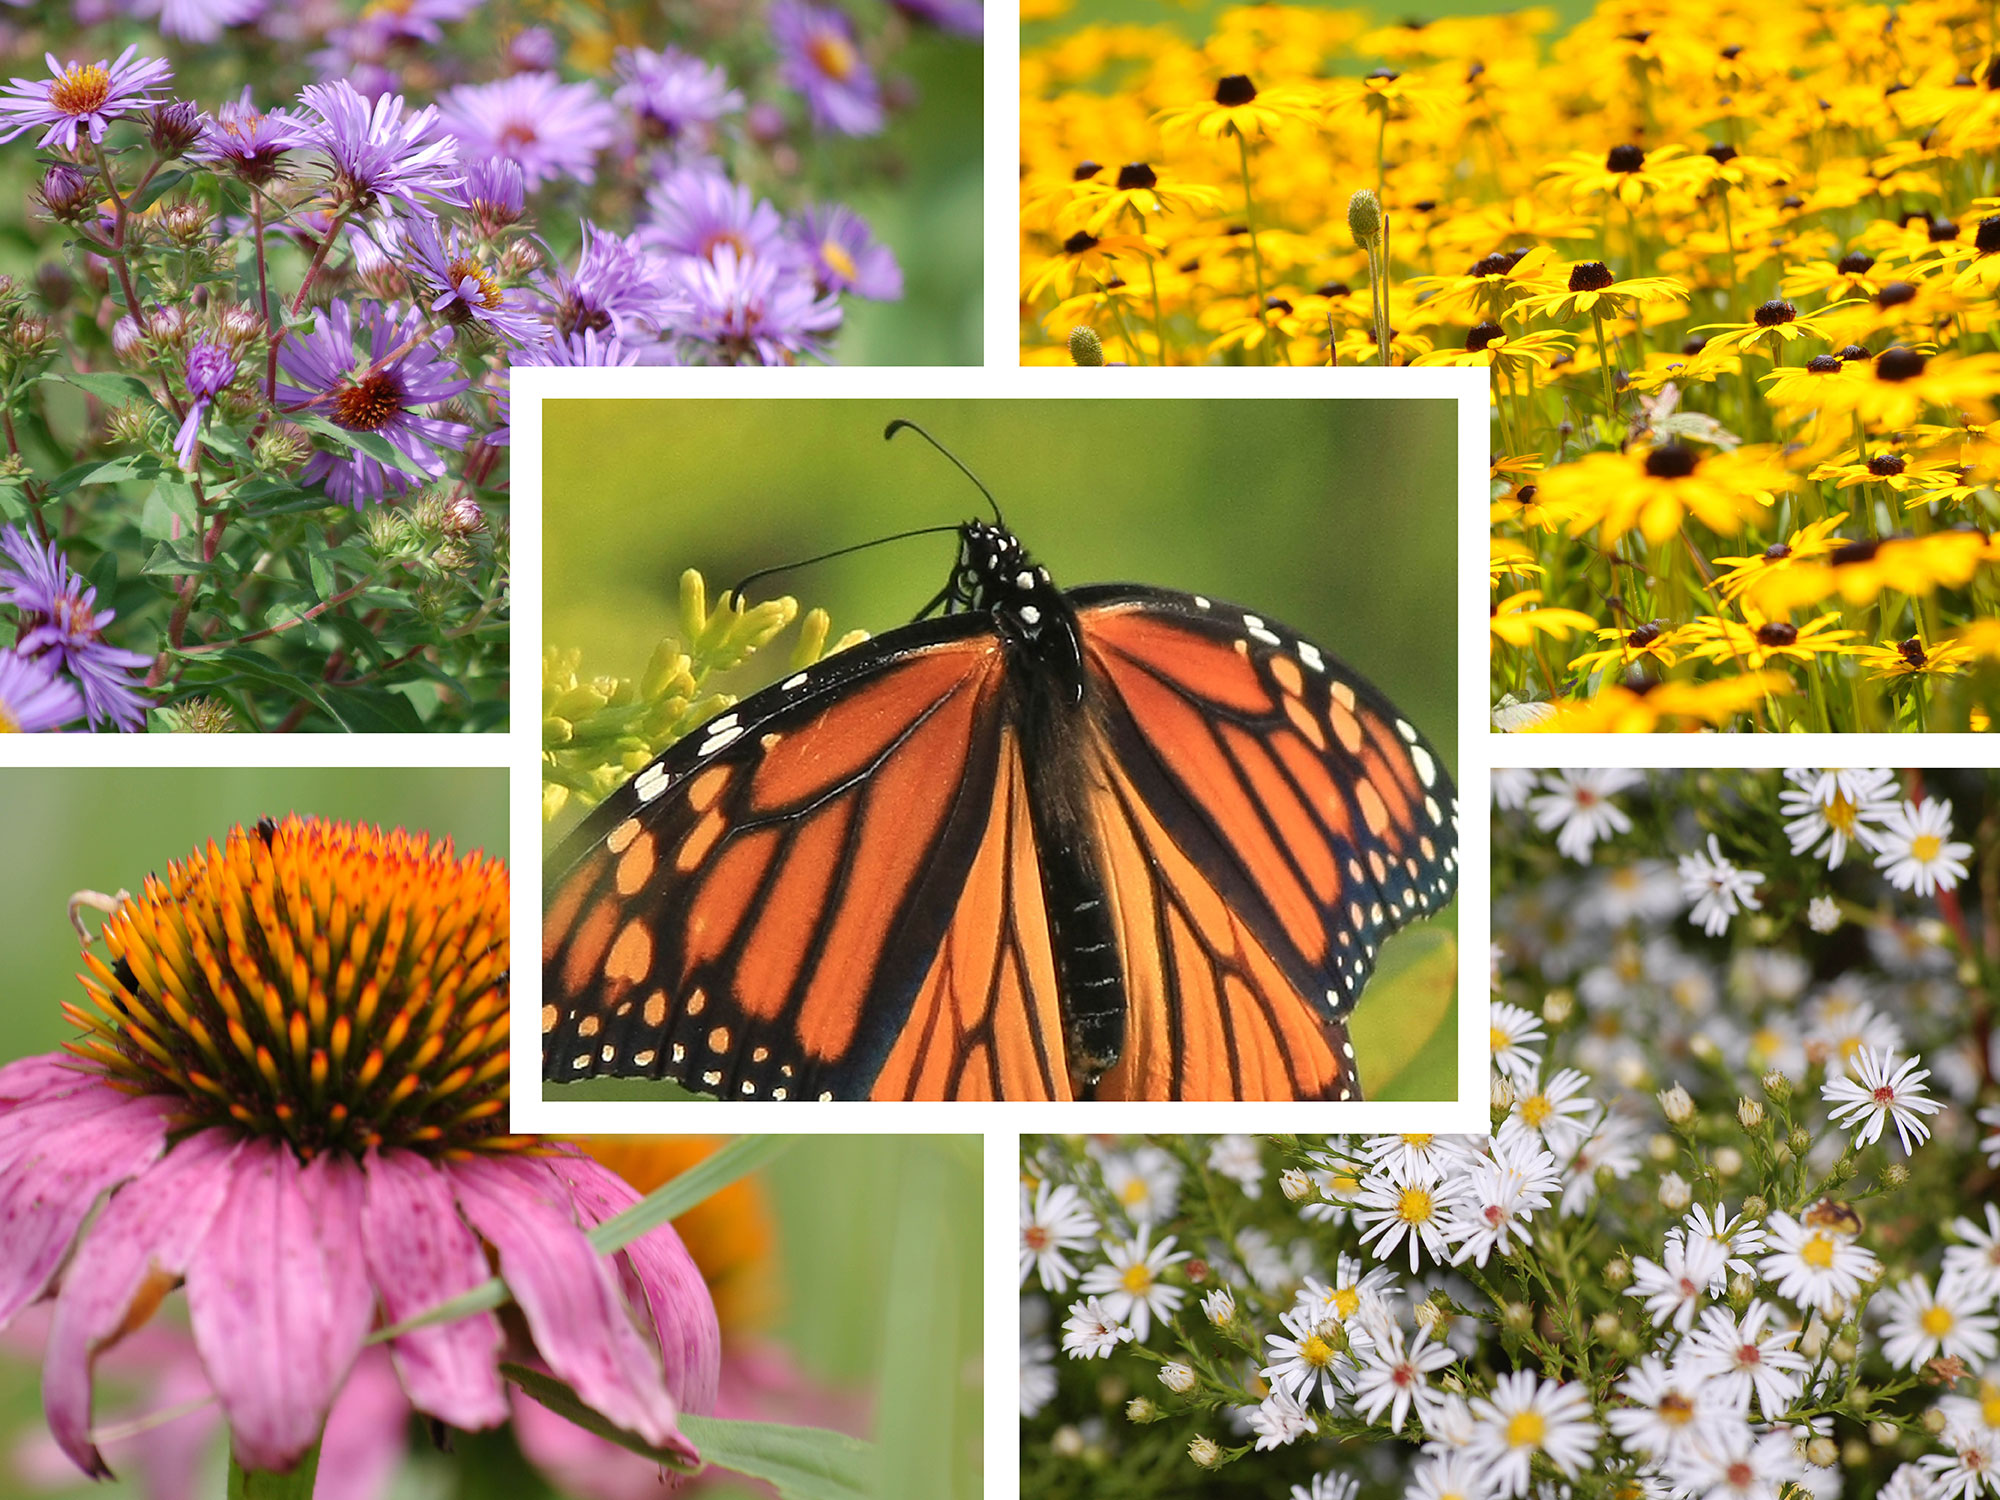 A monarch butterfly and wildflowers.